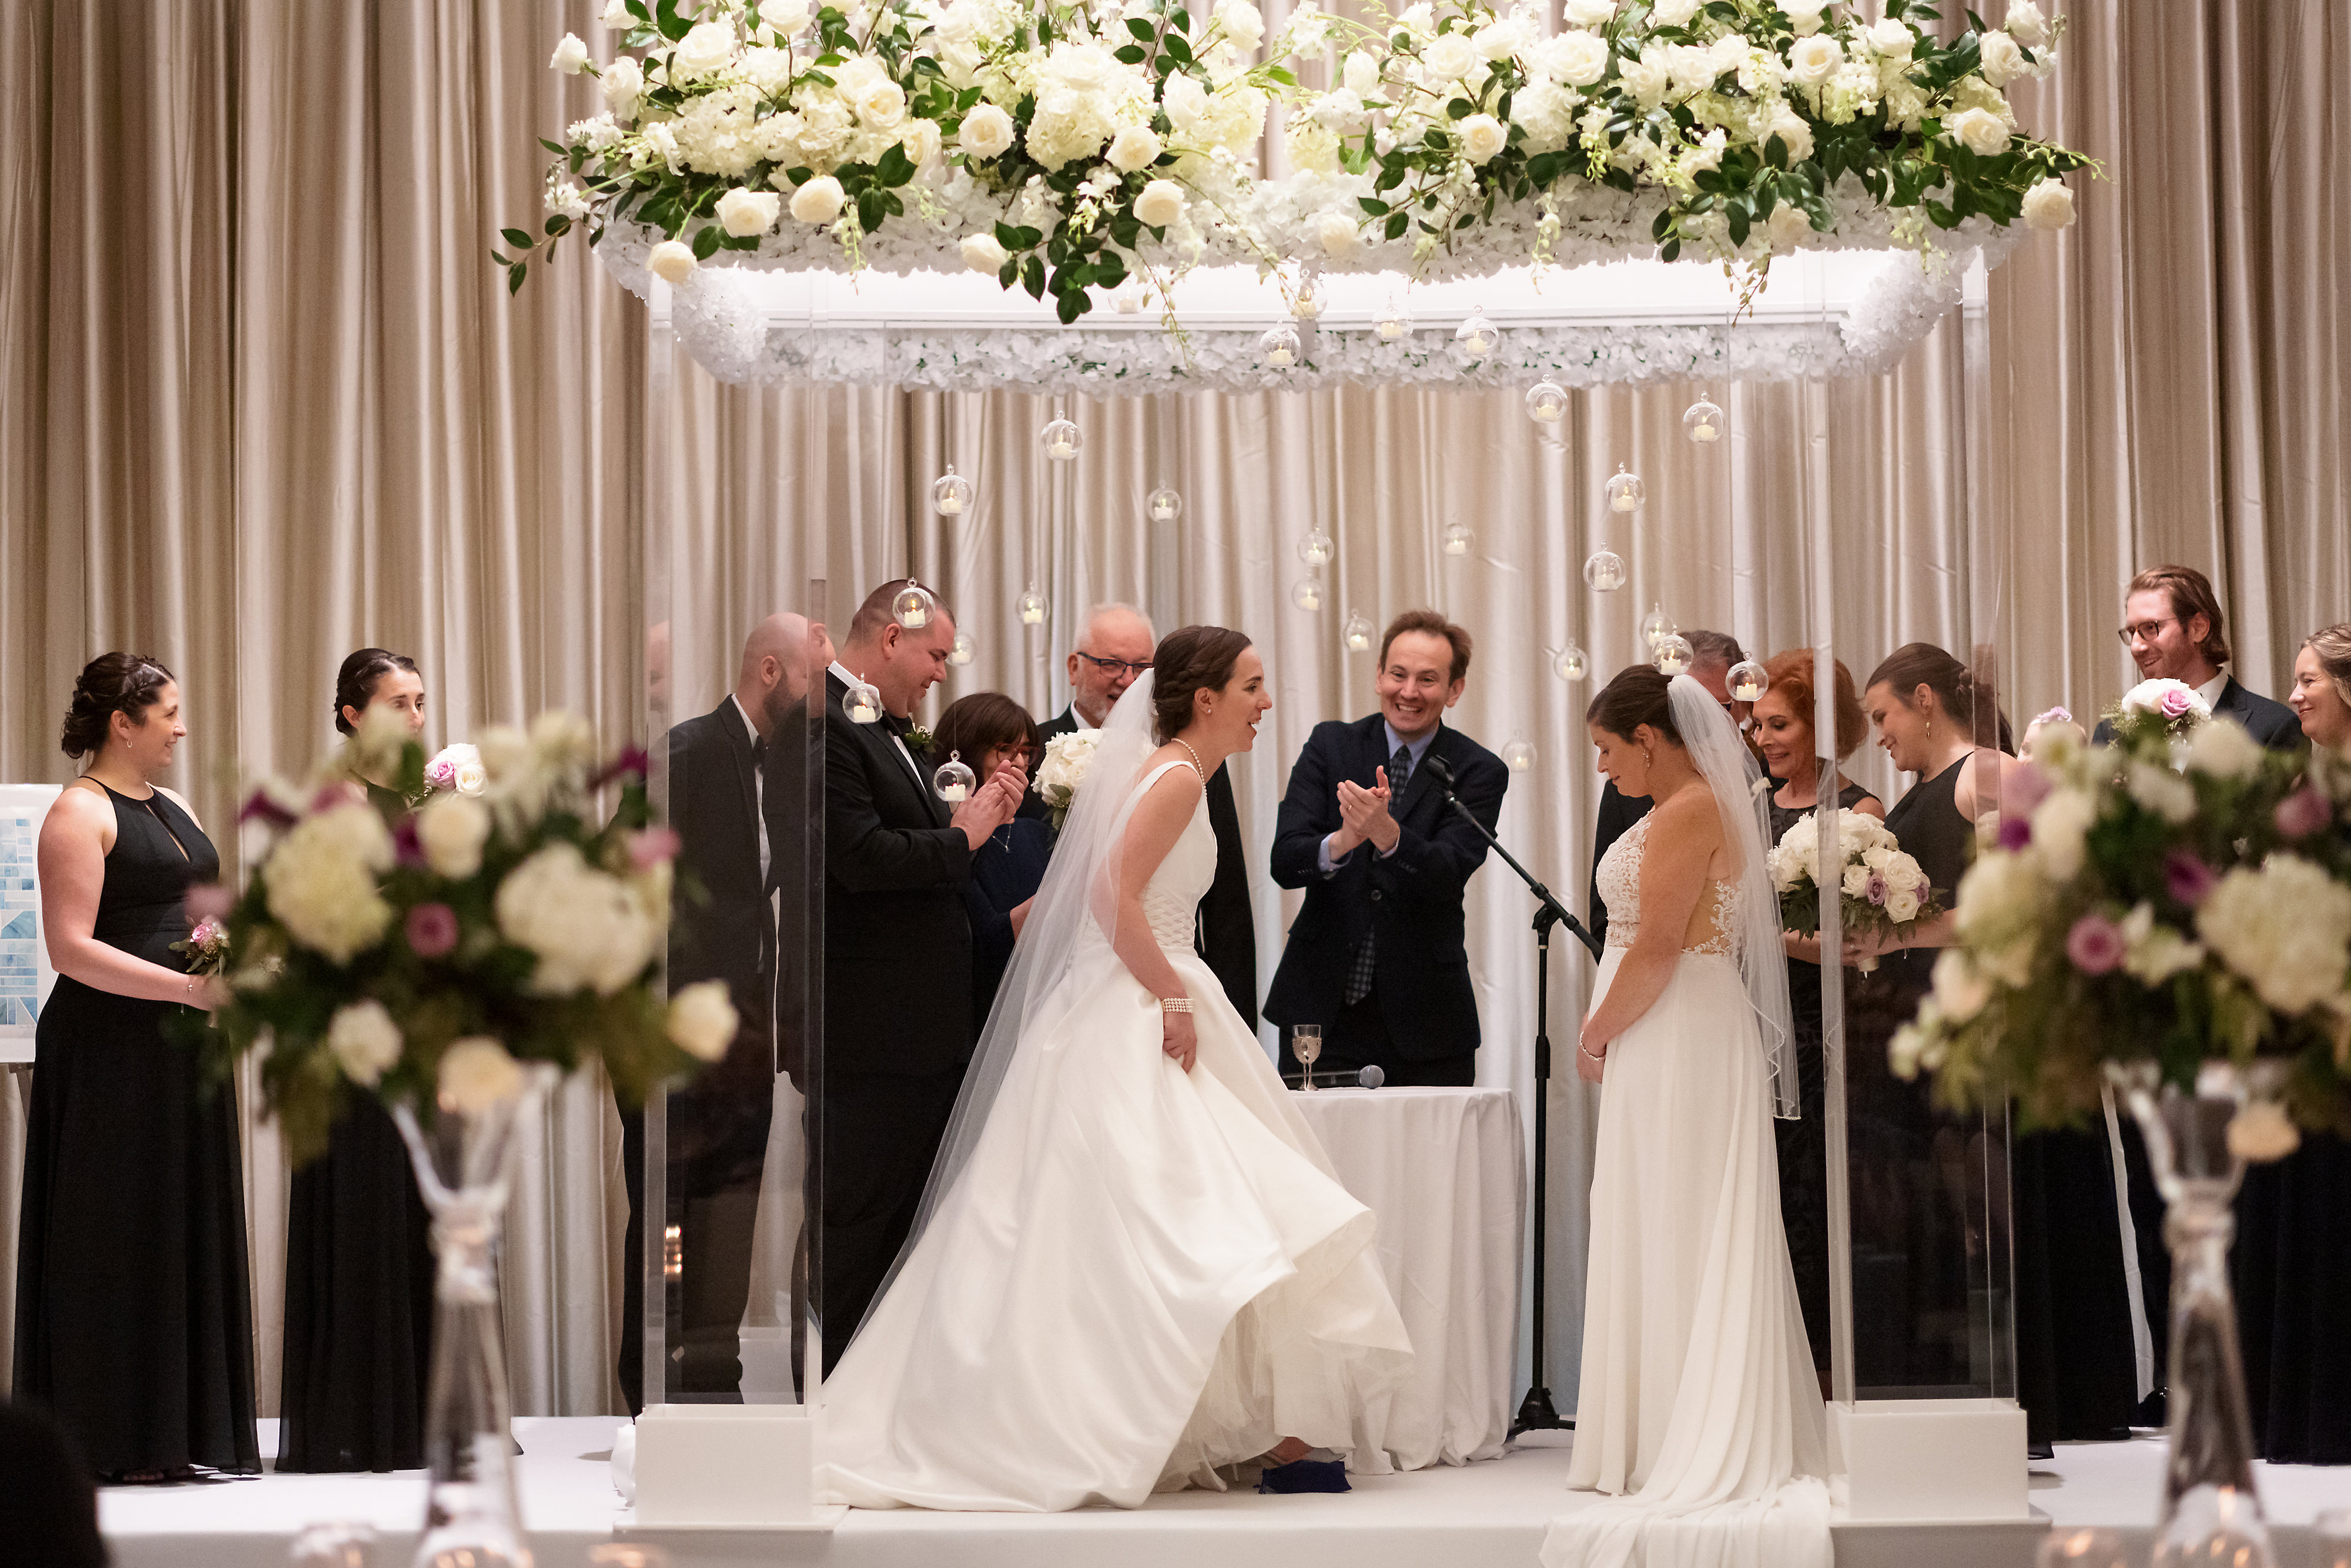 Brides break glass during wedding ceremony at The Langham Hotel in downtown Chicago